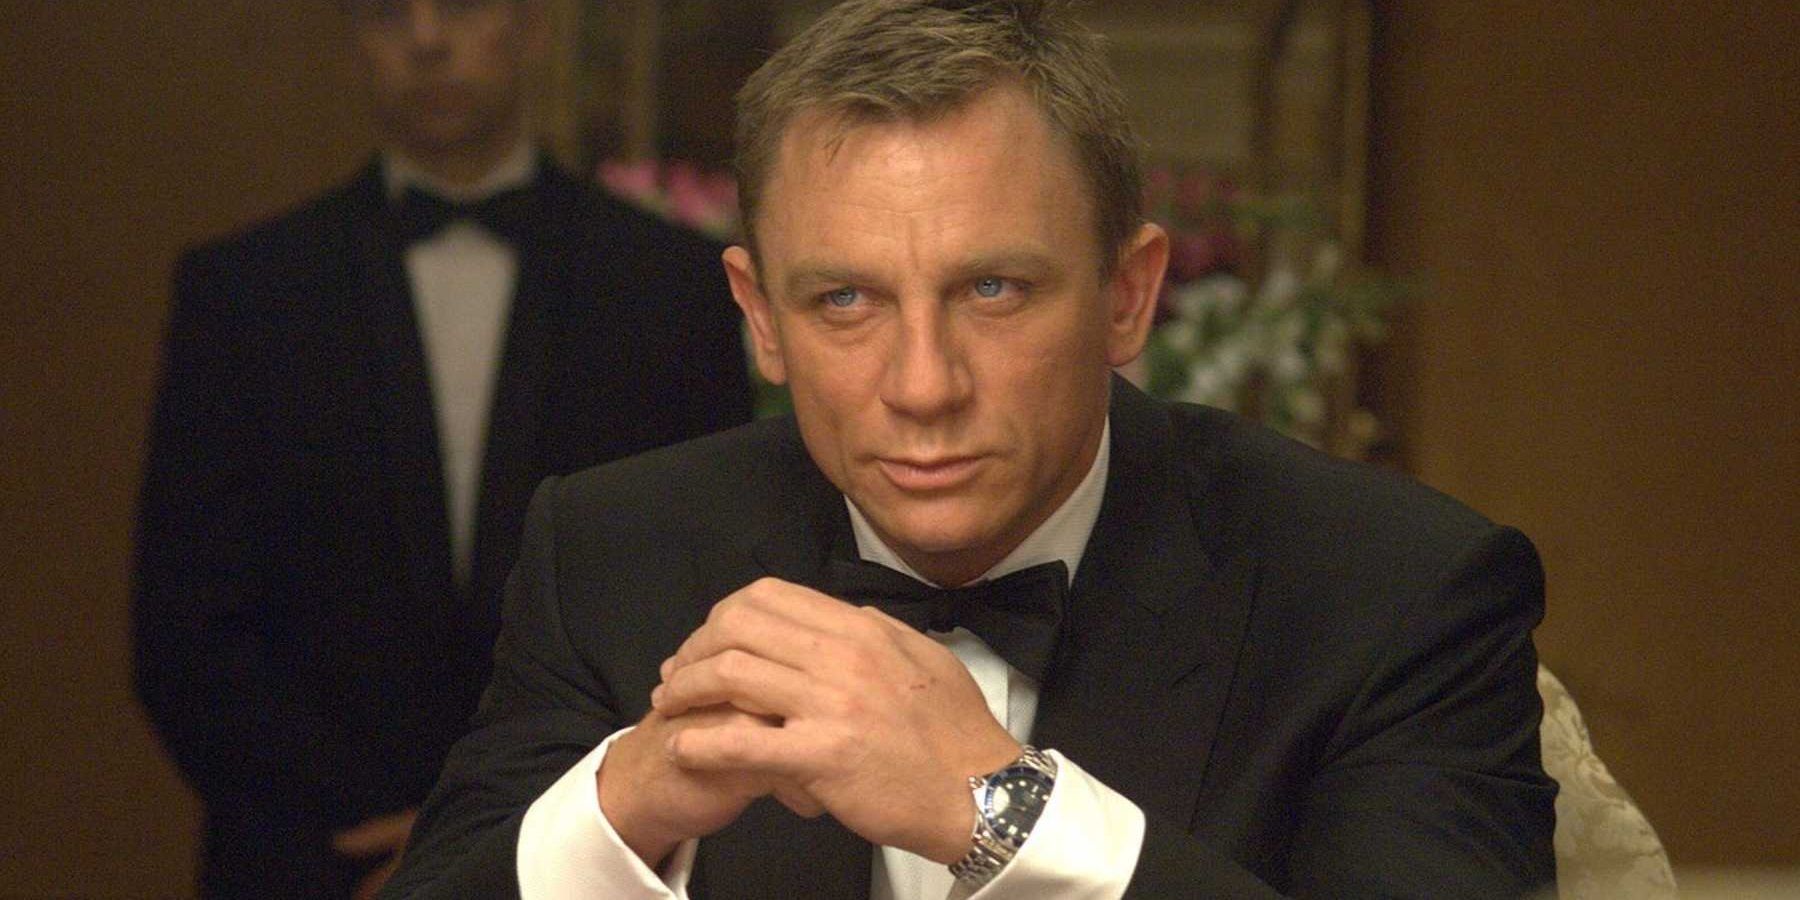 Daniel Craig as James Bond, in tuxedo and sitting at table